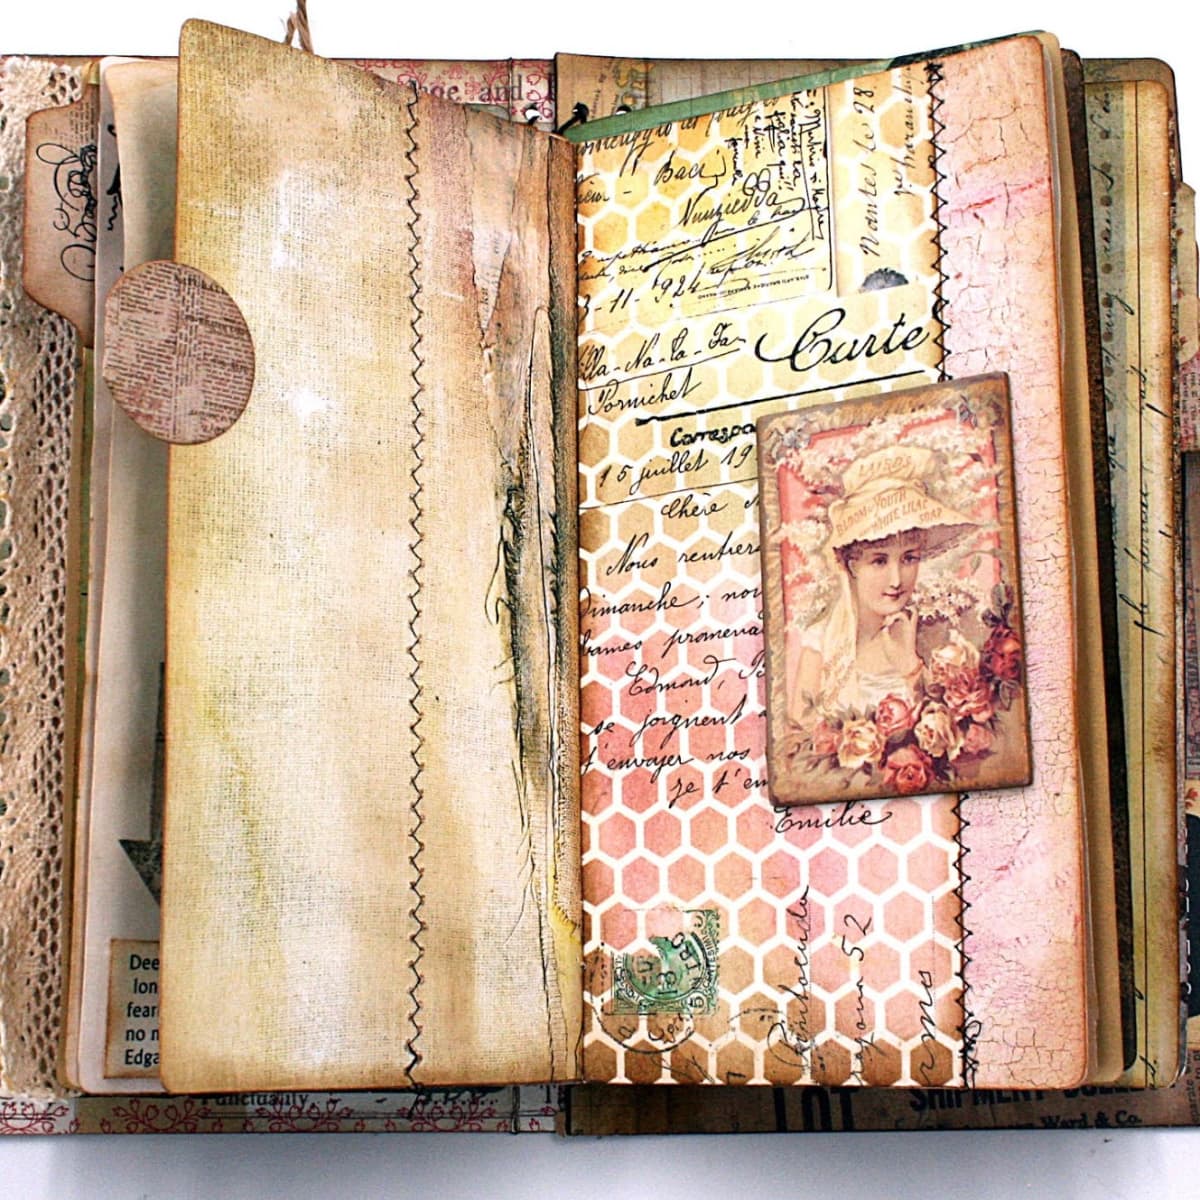 How to Make Junk Journal out of an Old Book!! (Part 2) Step by